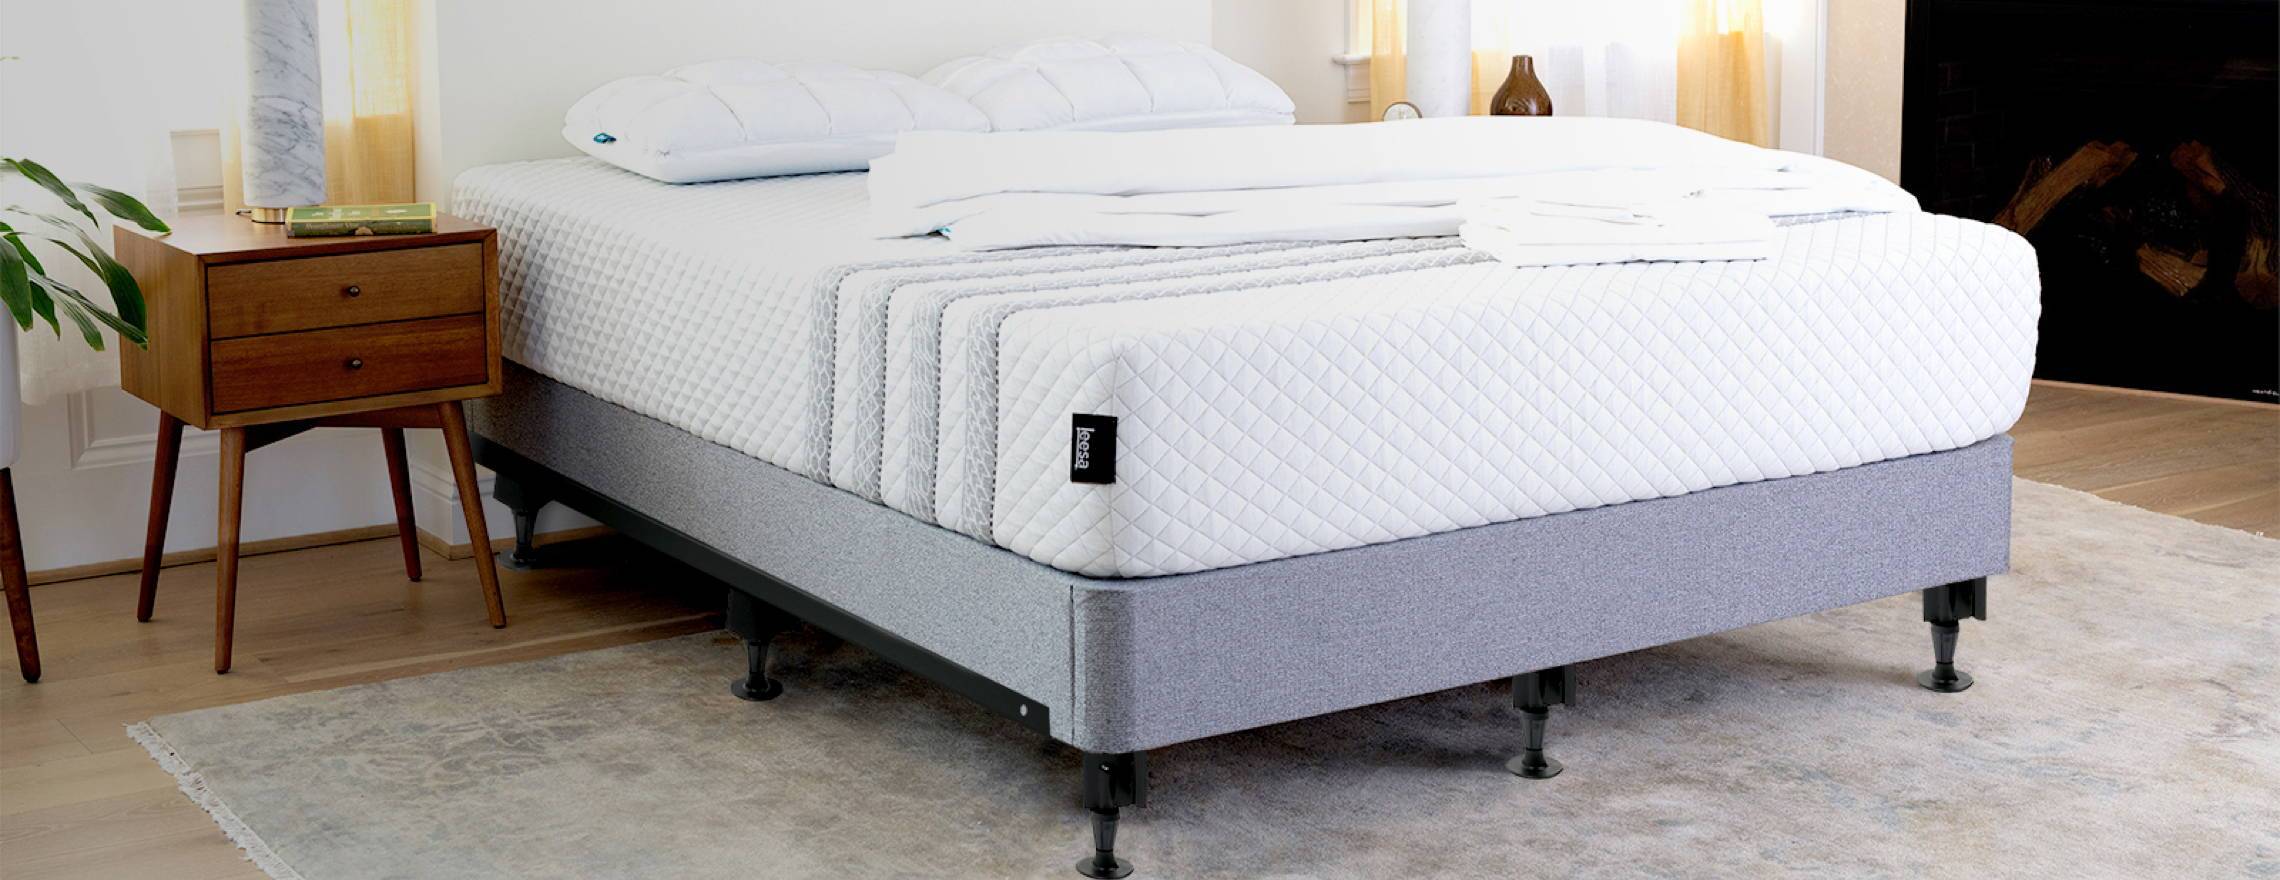 Hybrid Mattress, King Bed Without Box Spring